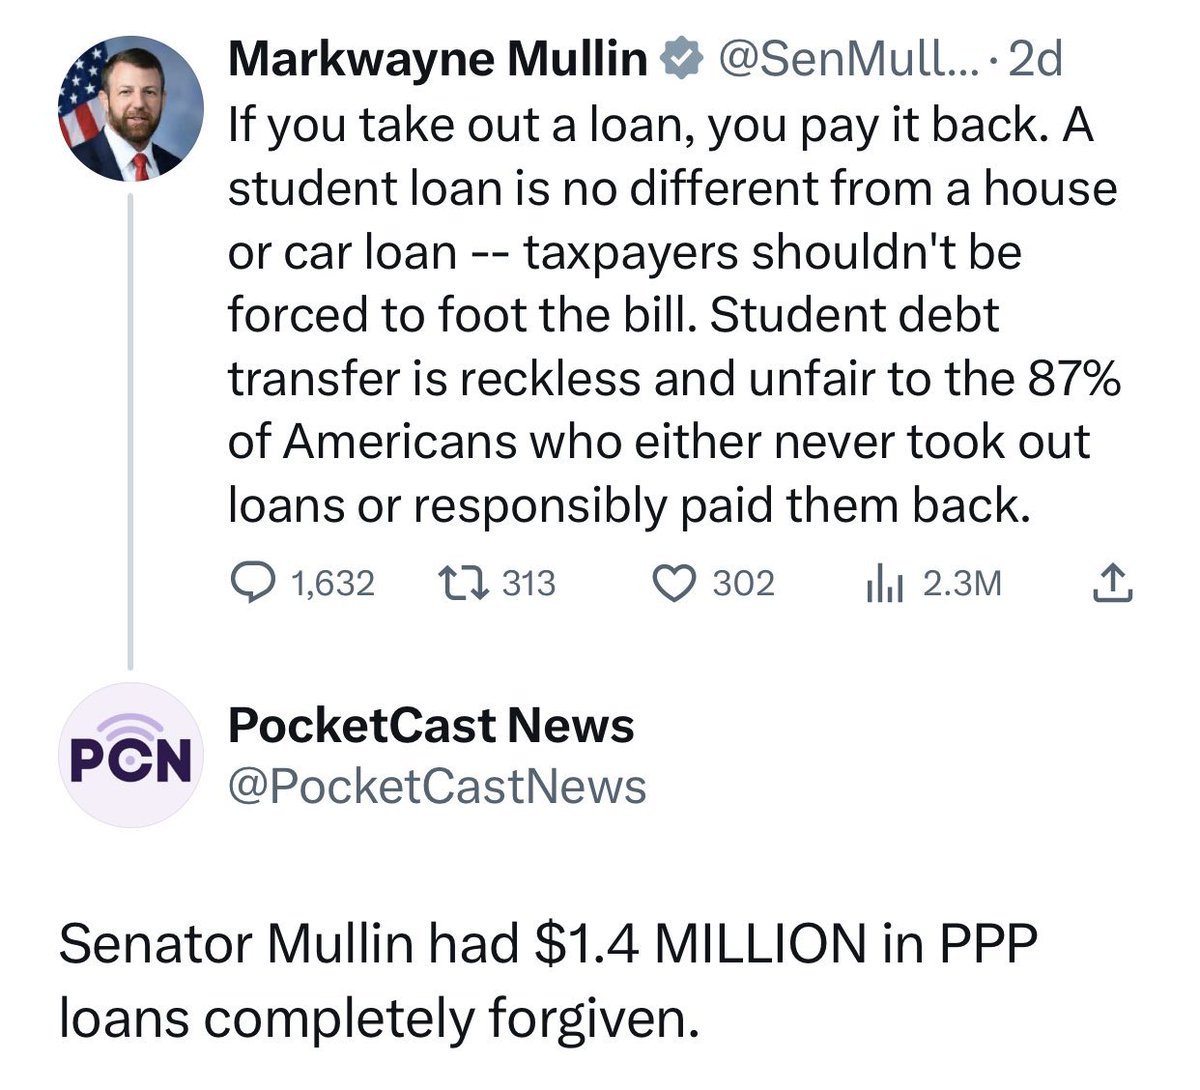 This is who @MarkwayneMullin @SenMullin is. He expects YOU to pay back YOUR loan but doesn’t think HE should have to pay back HIS loan. #MarkwayneMullin #GOPHypocrisy